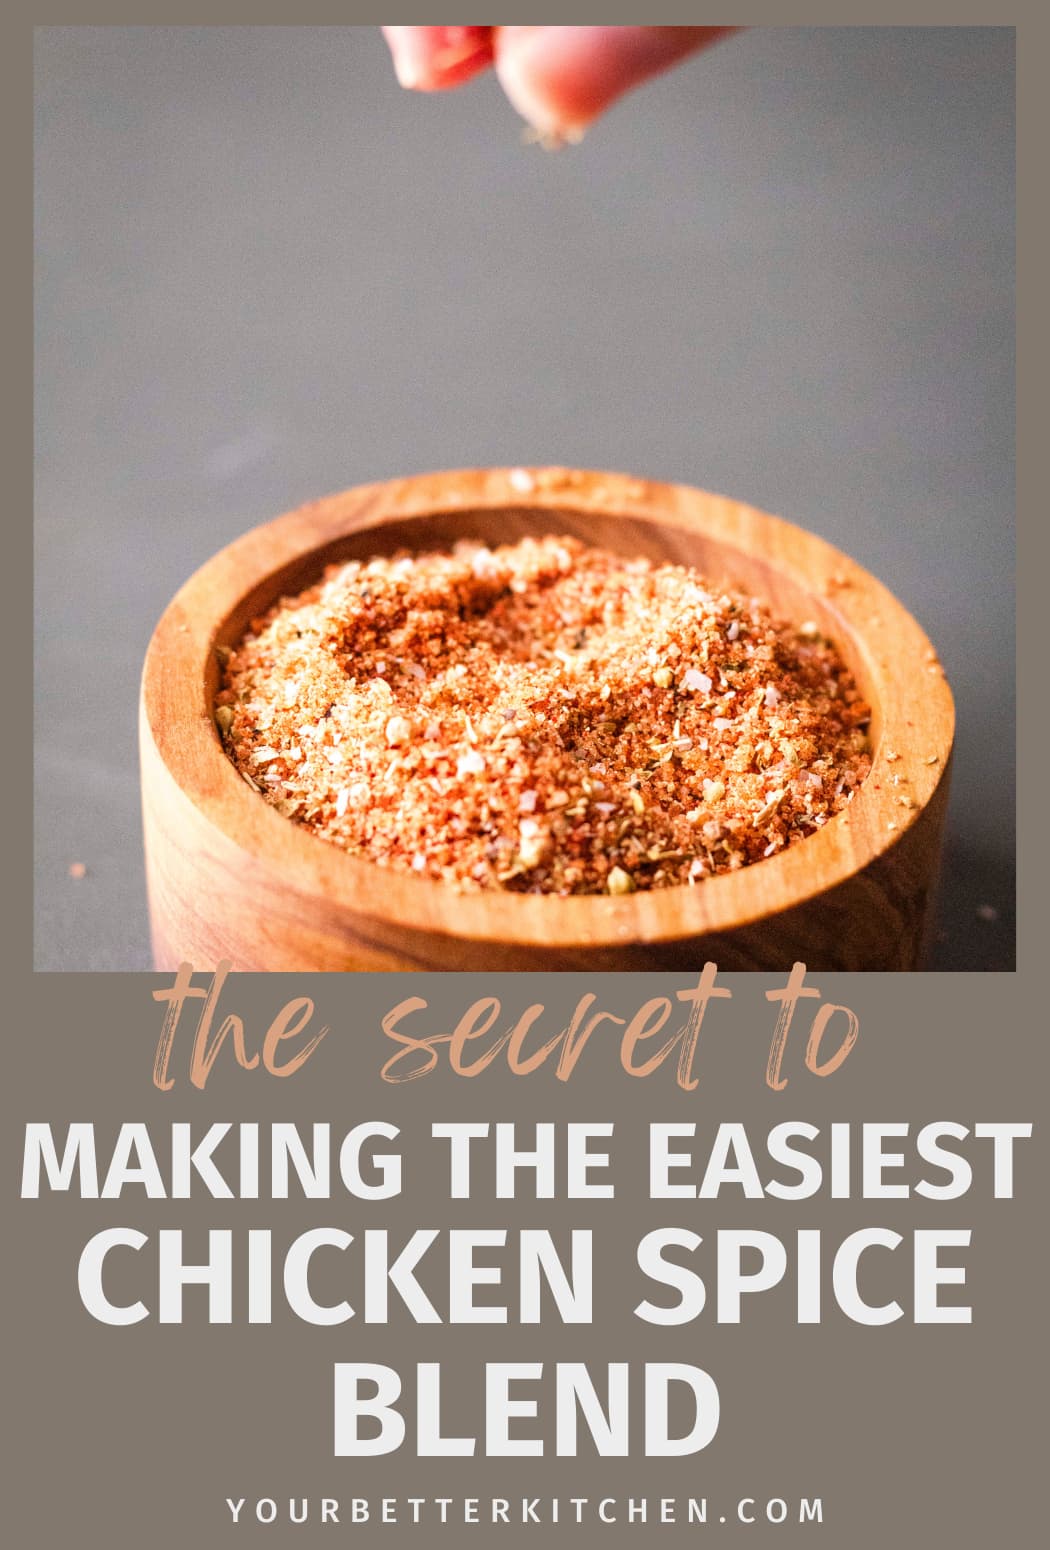 Pin image showing chicken spice blend in a wooden pinch bowl.